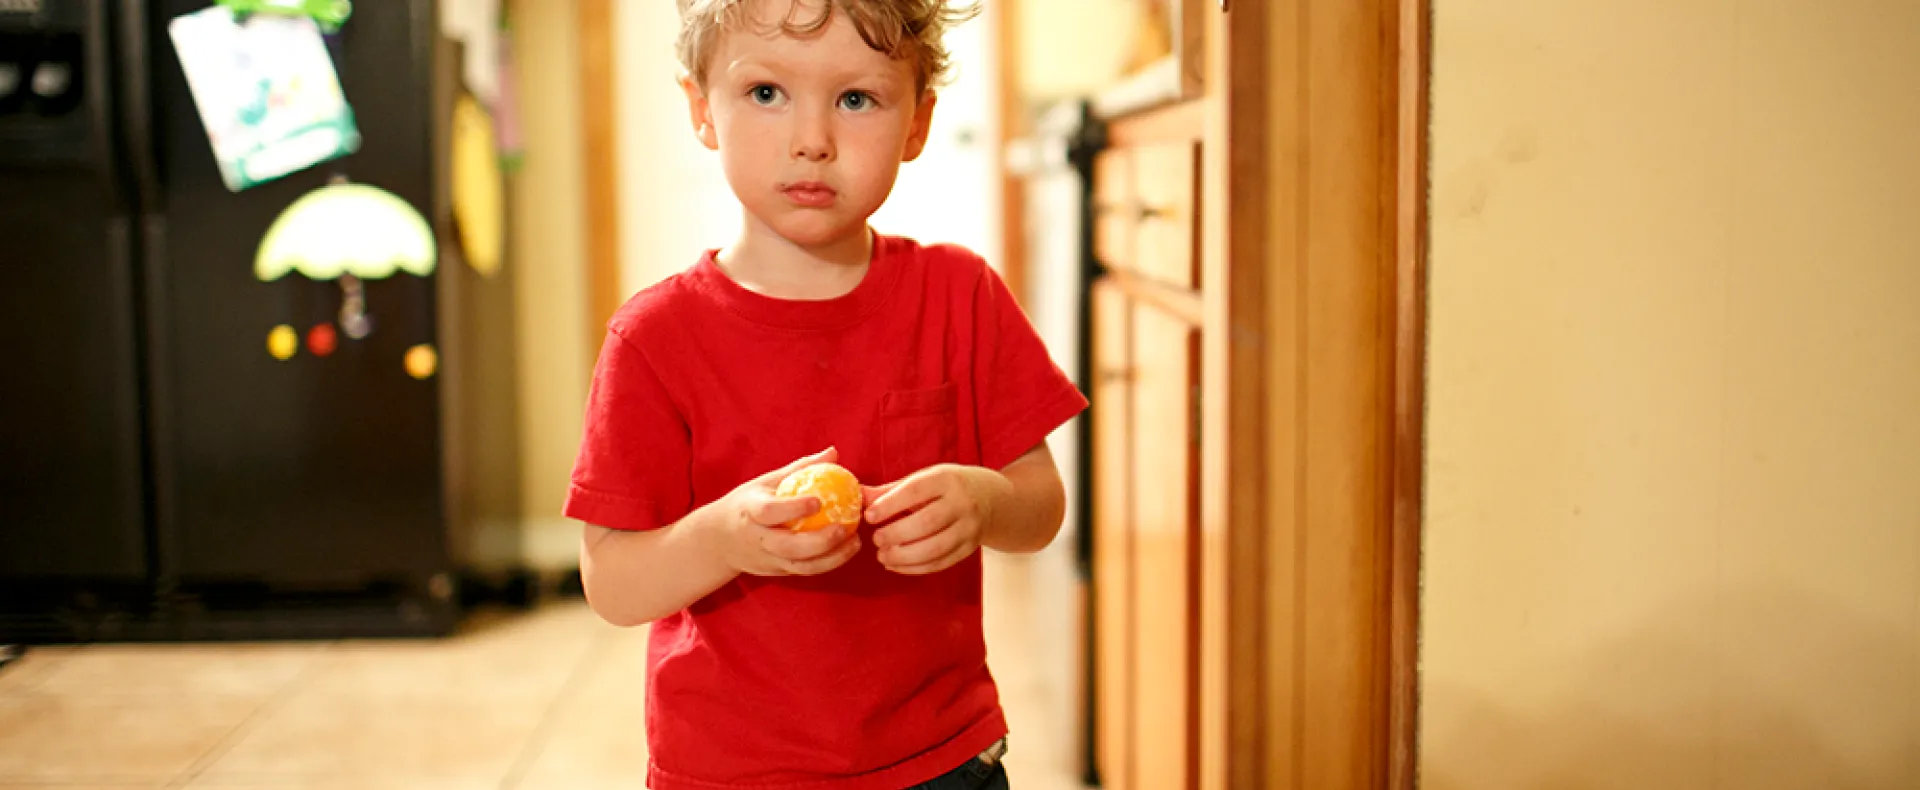 A little boy with a sad look on his face stands in his kitchen